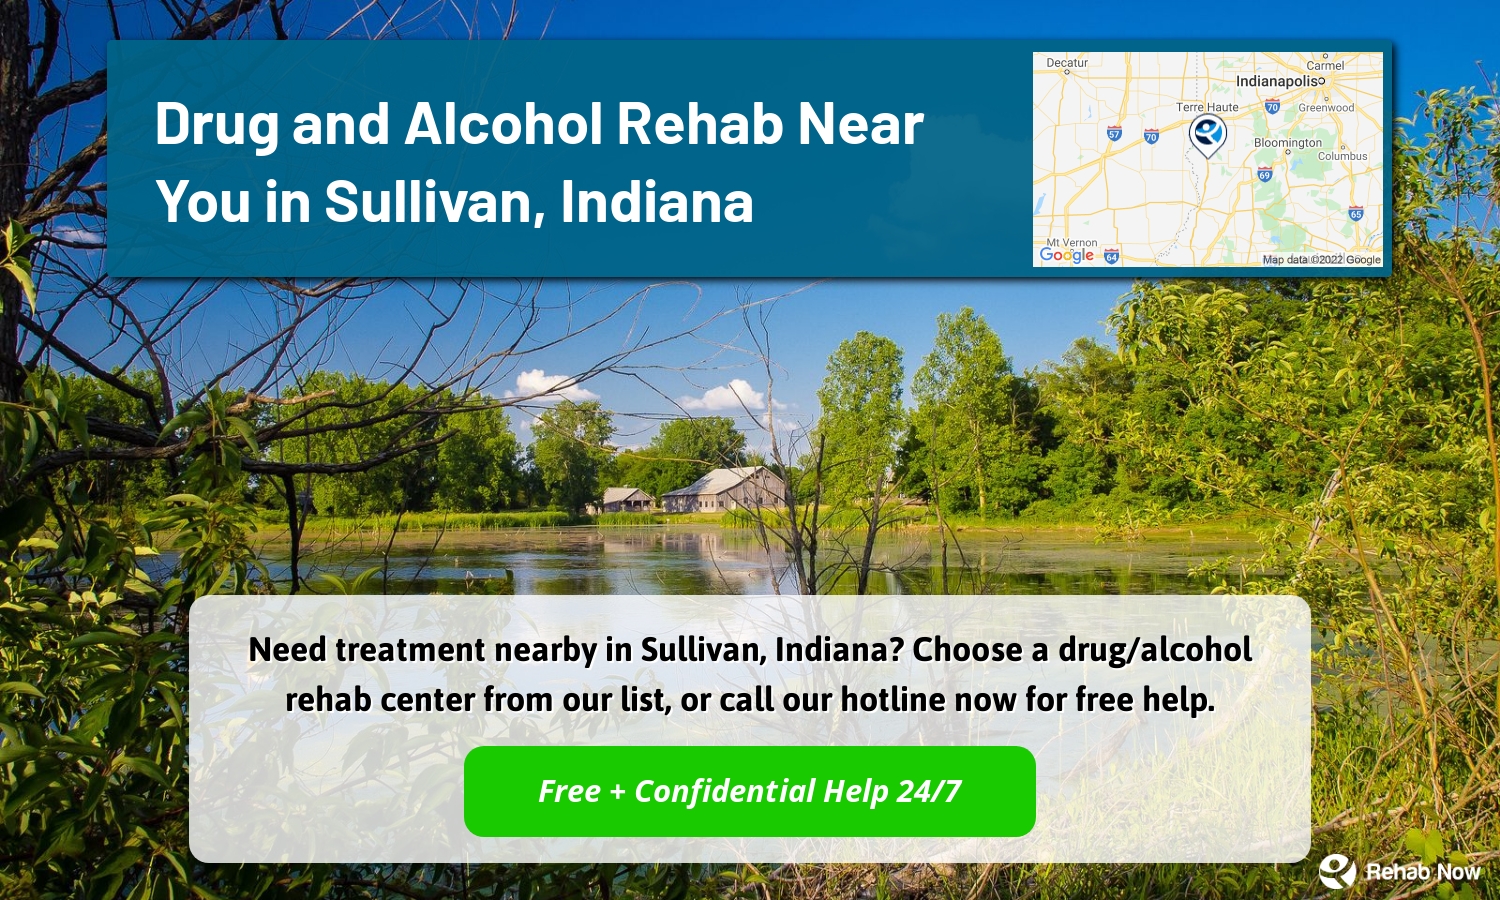 Need treatment nearby in Sullivan, Indiana? Choose a drug/alcohol rehab center from our list, or call our hotline now for free help.